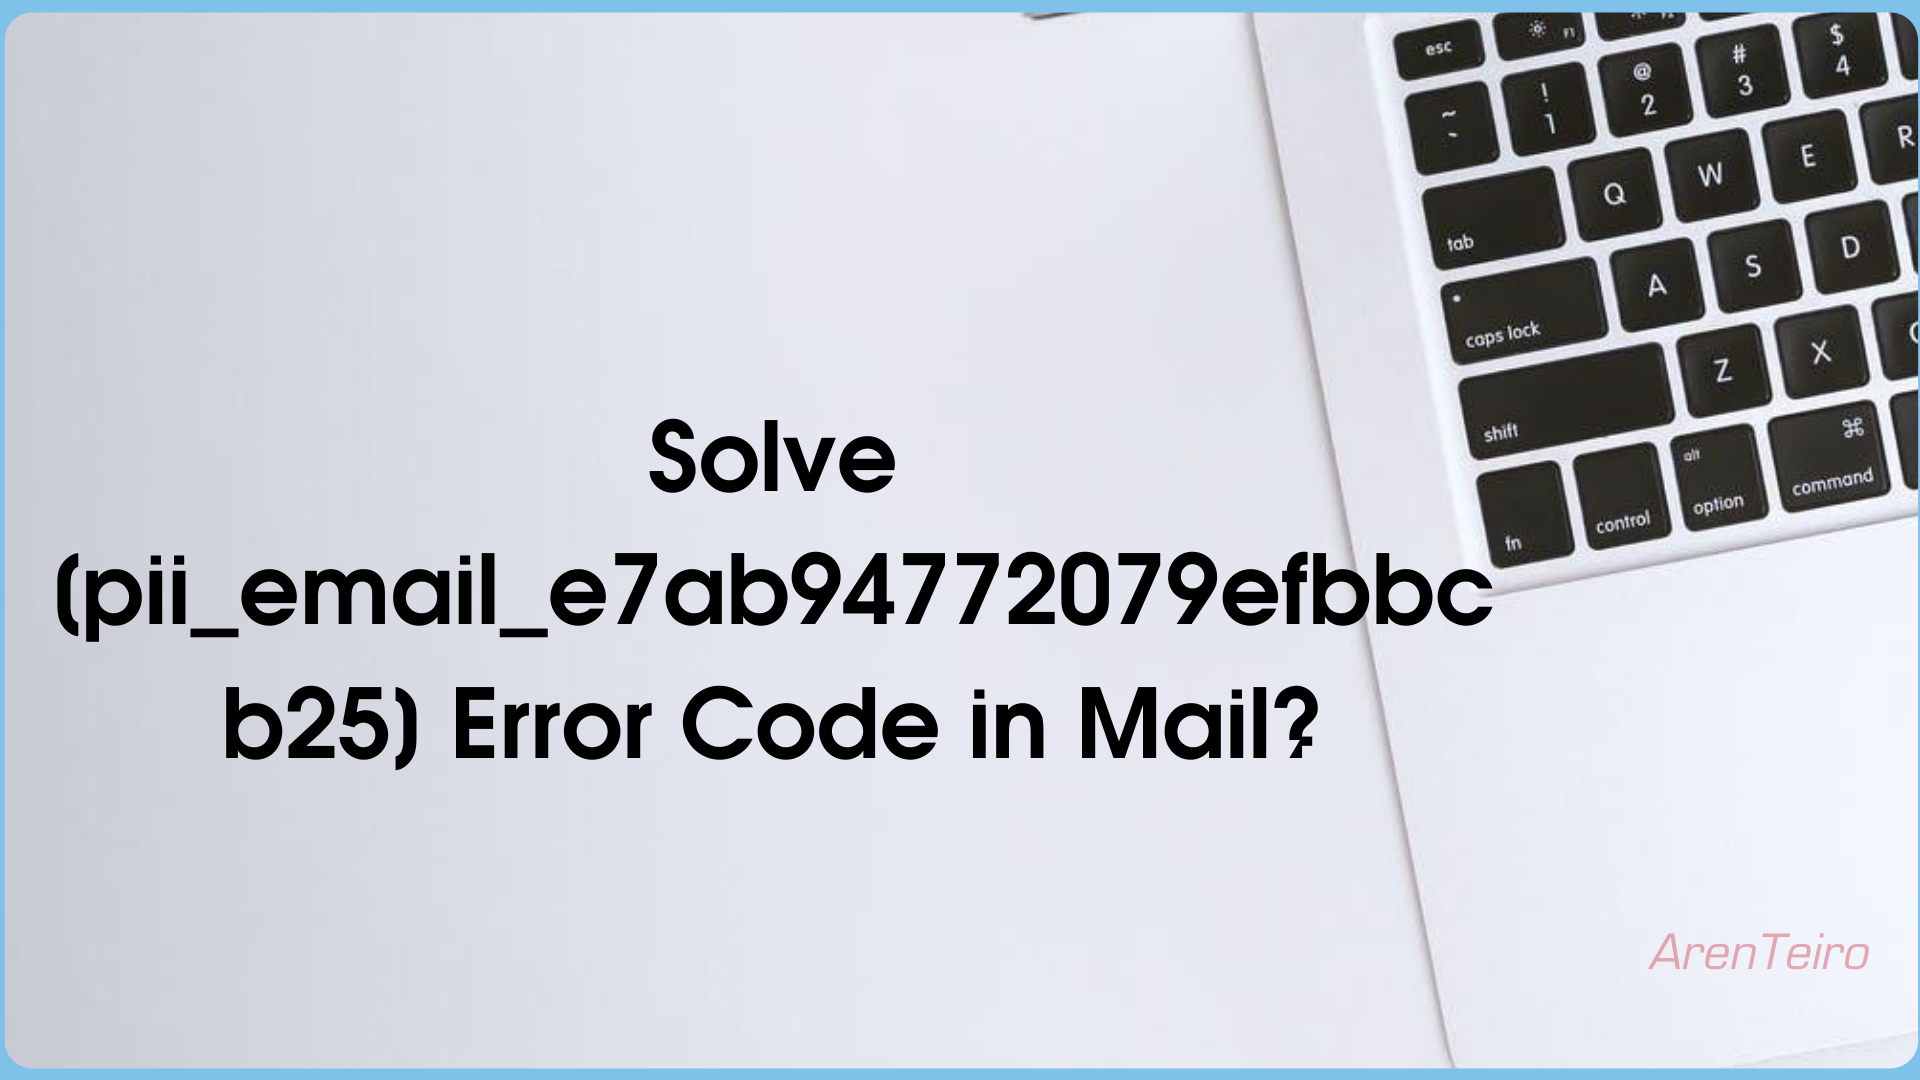 3 Ways to Fix [pii_email_e7ab94772079efbbcb25] Error Code in MS Outlook